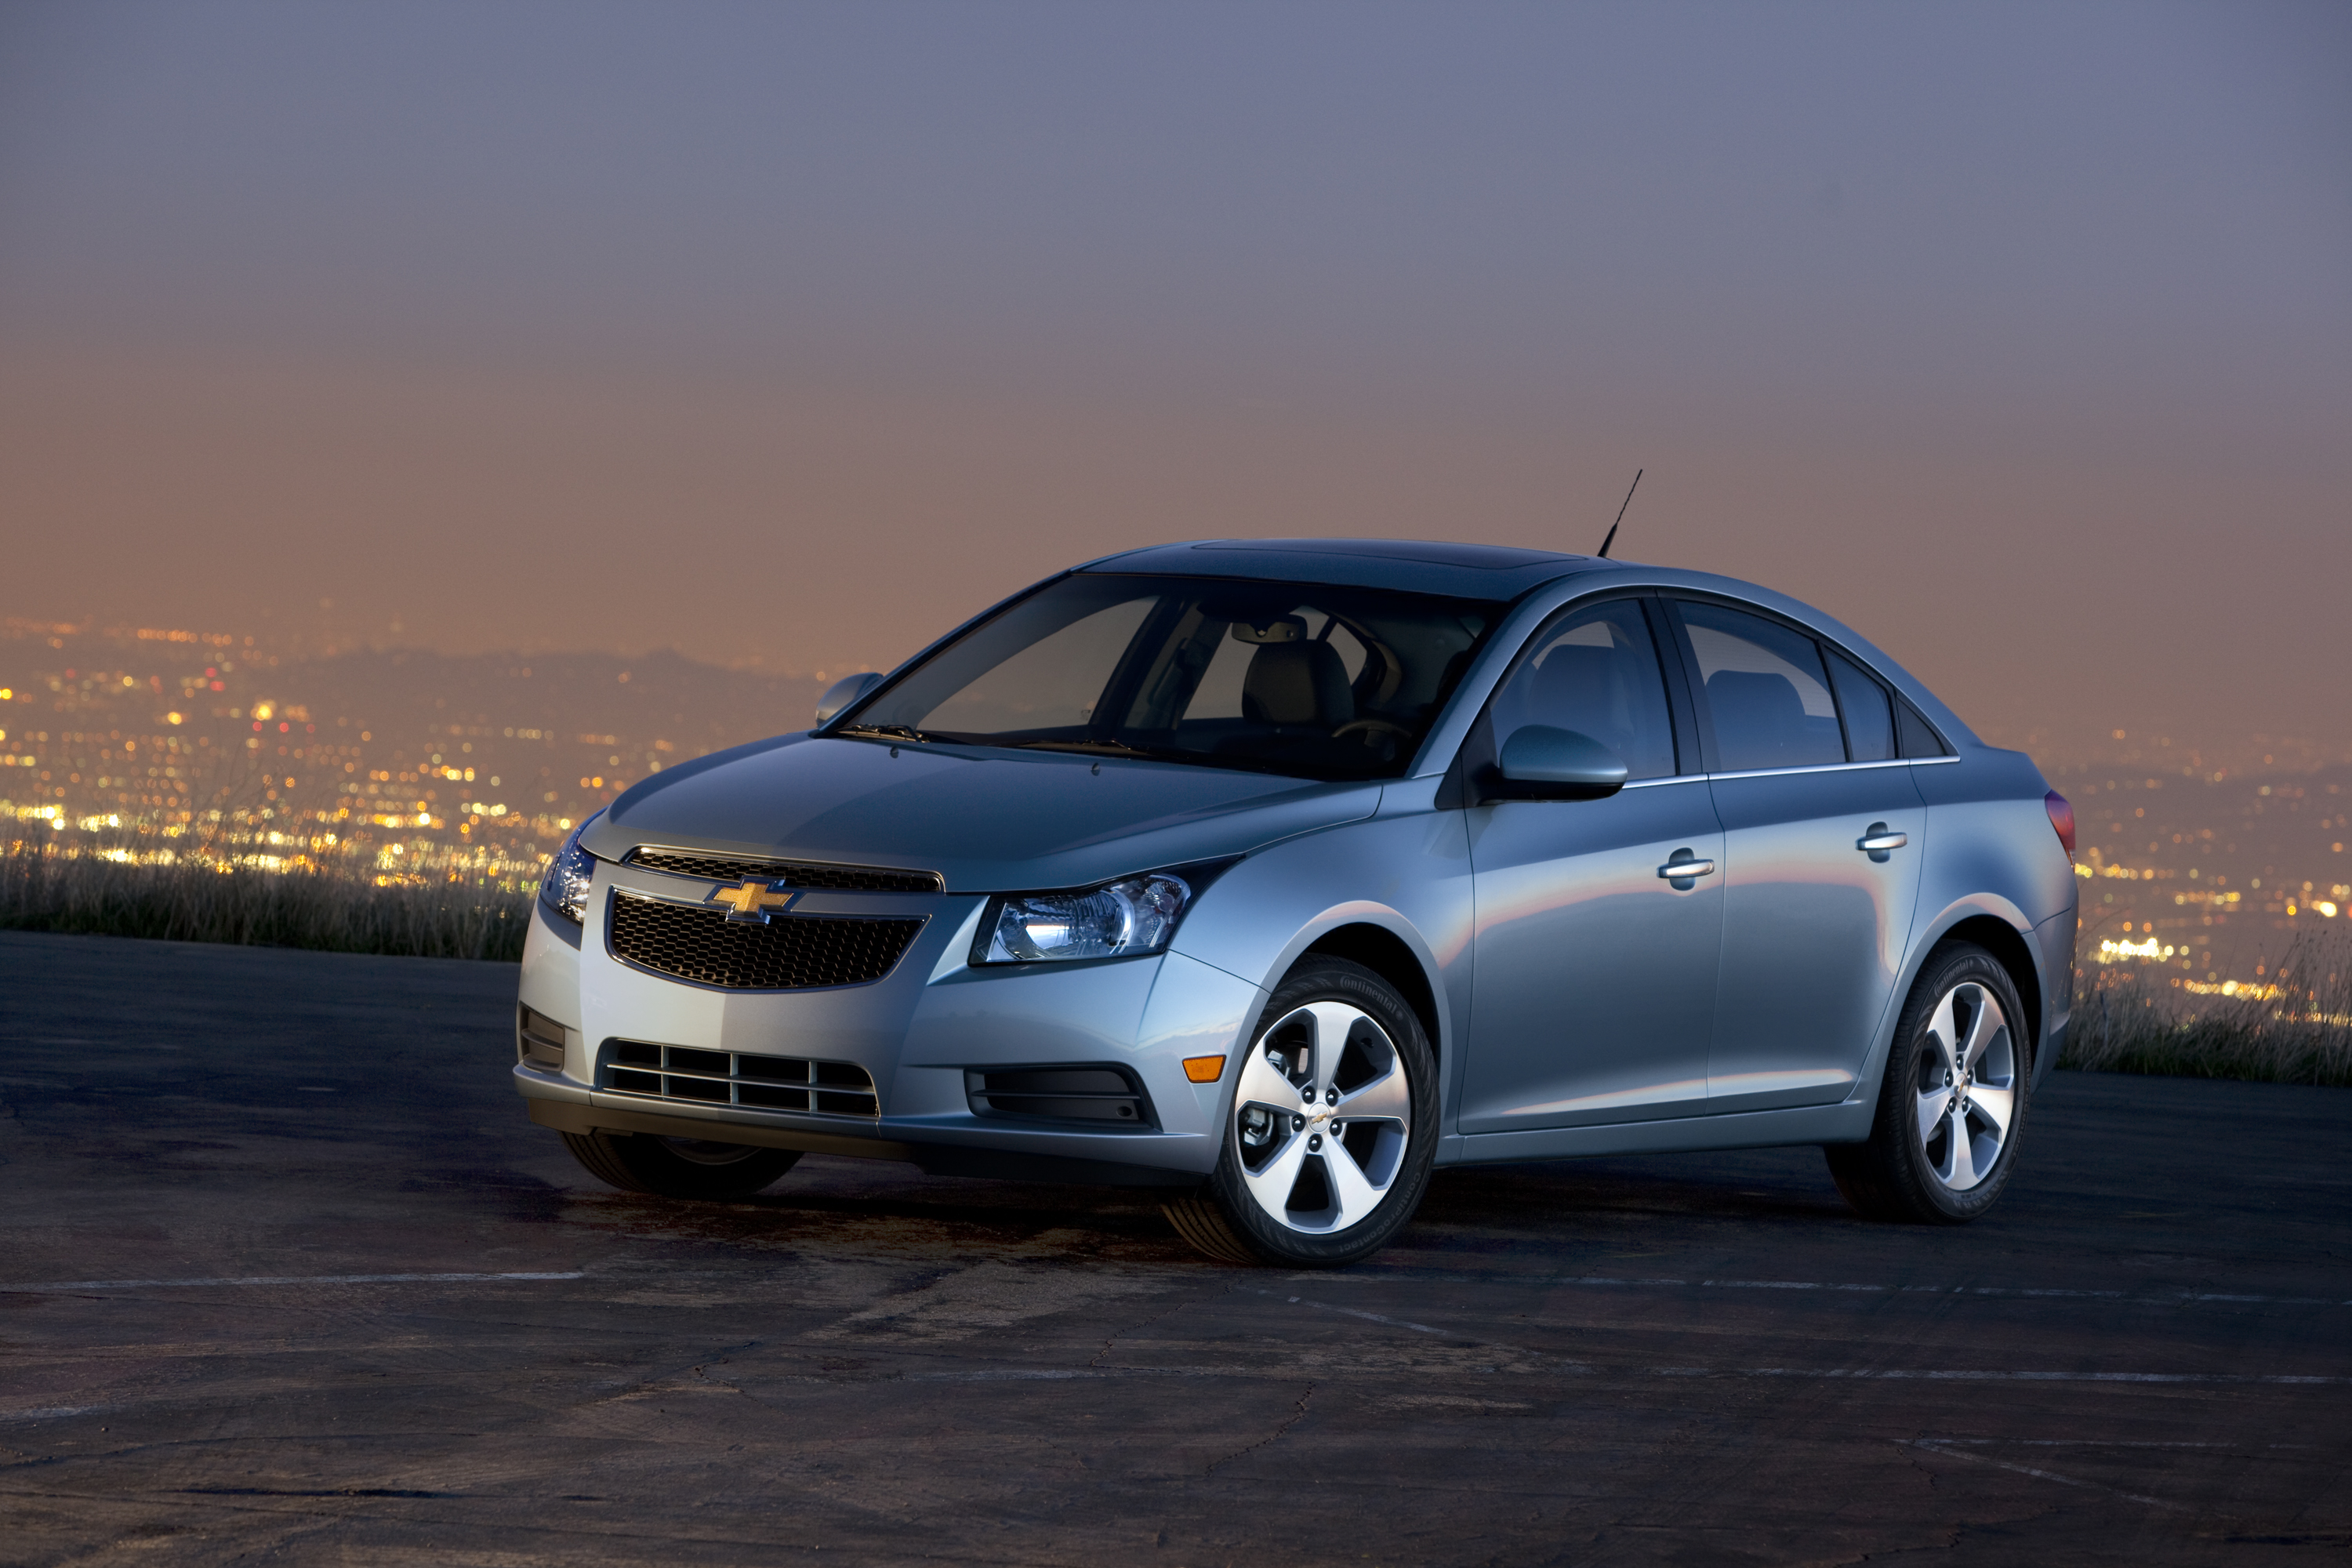 2011 Chevrolet Cruze Chevy Review Ratings Specs Prices